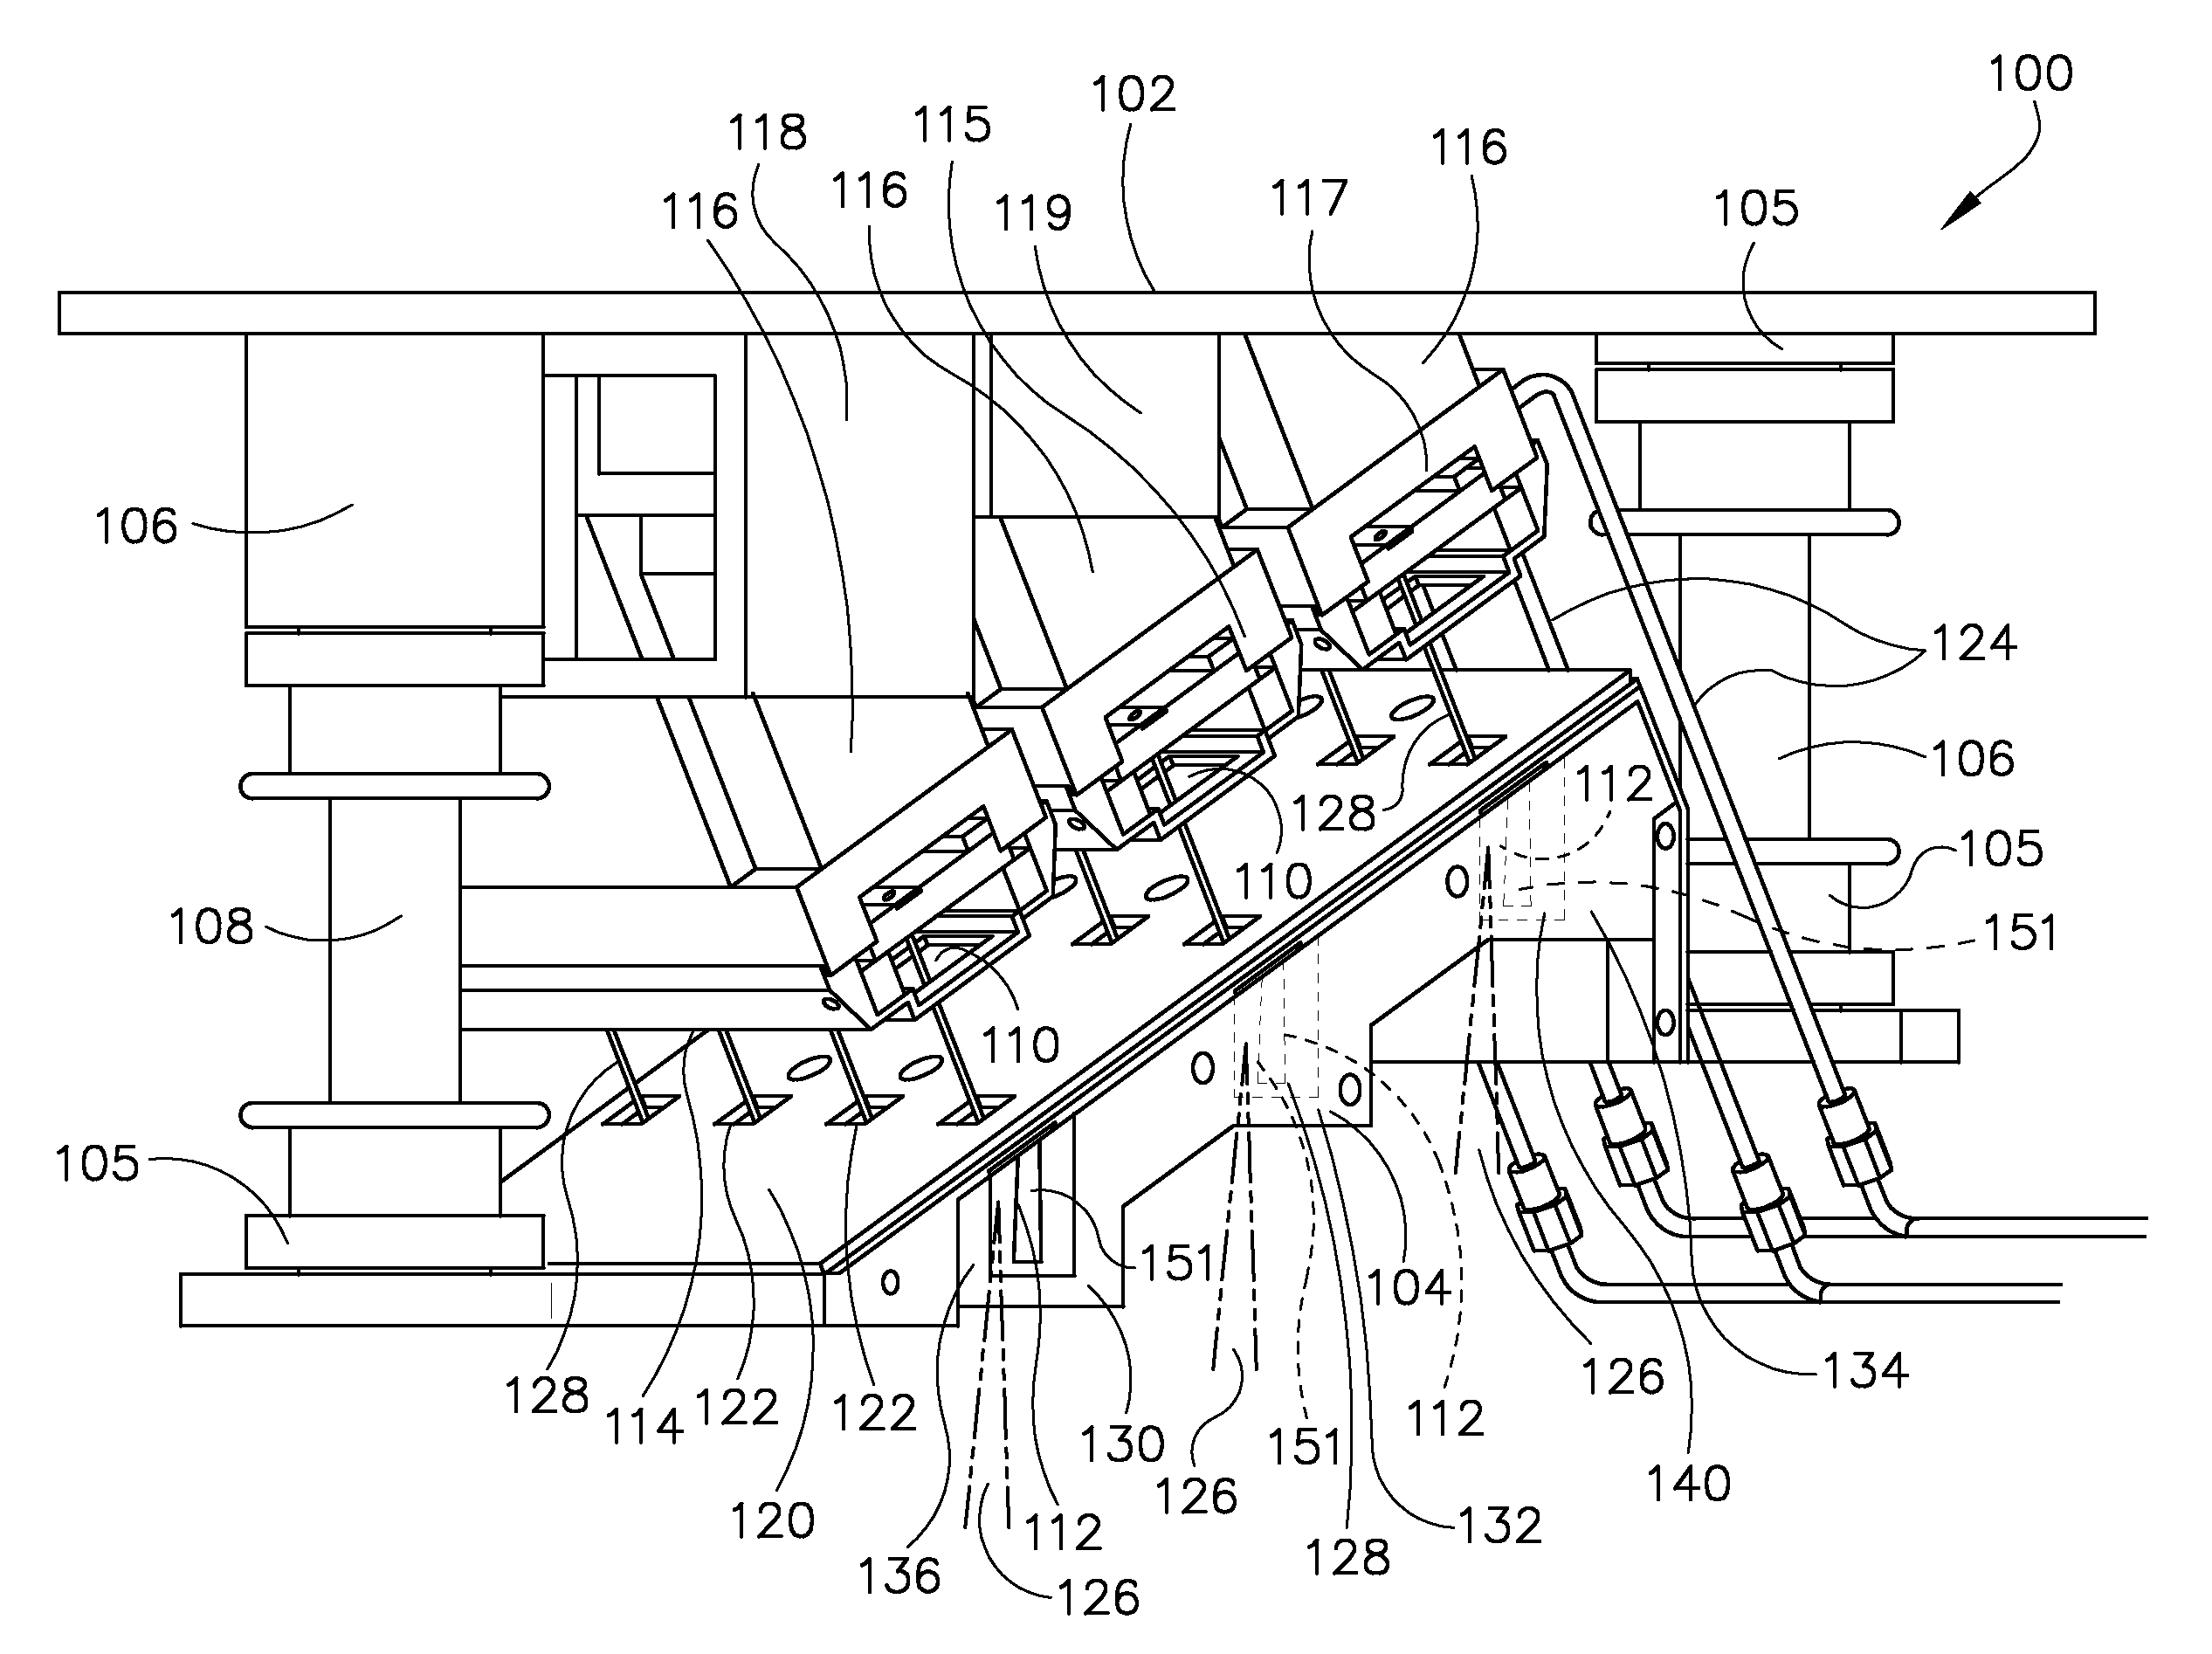 Apparatus for providing shielding in a multispot x-ray source and method of making same